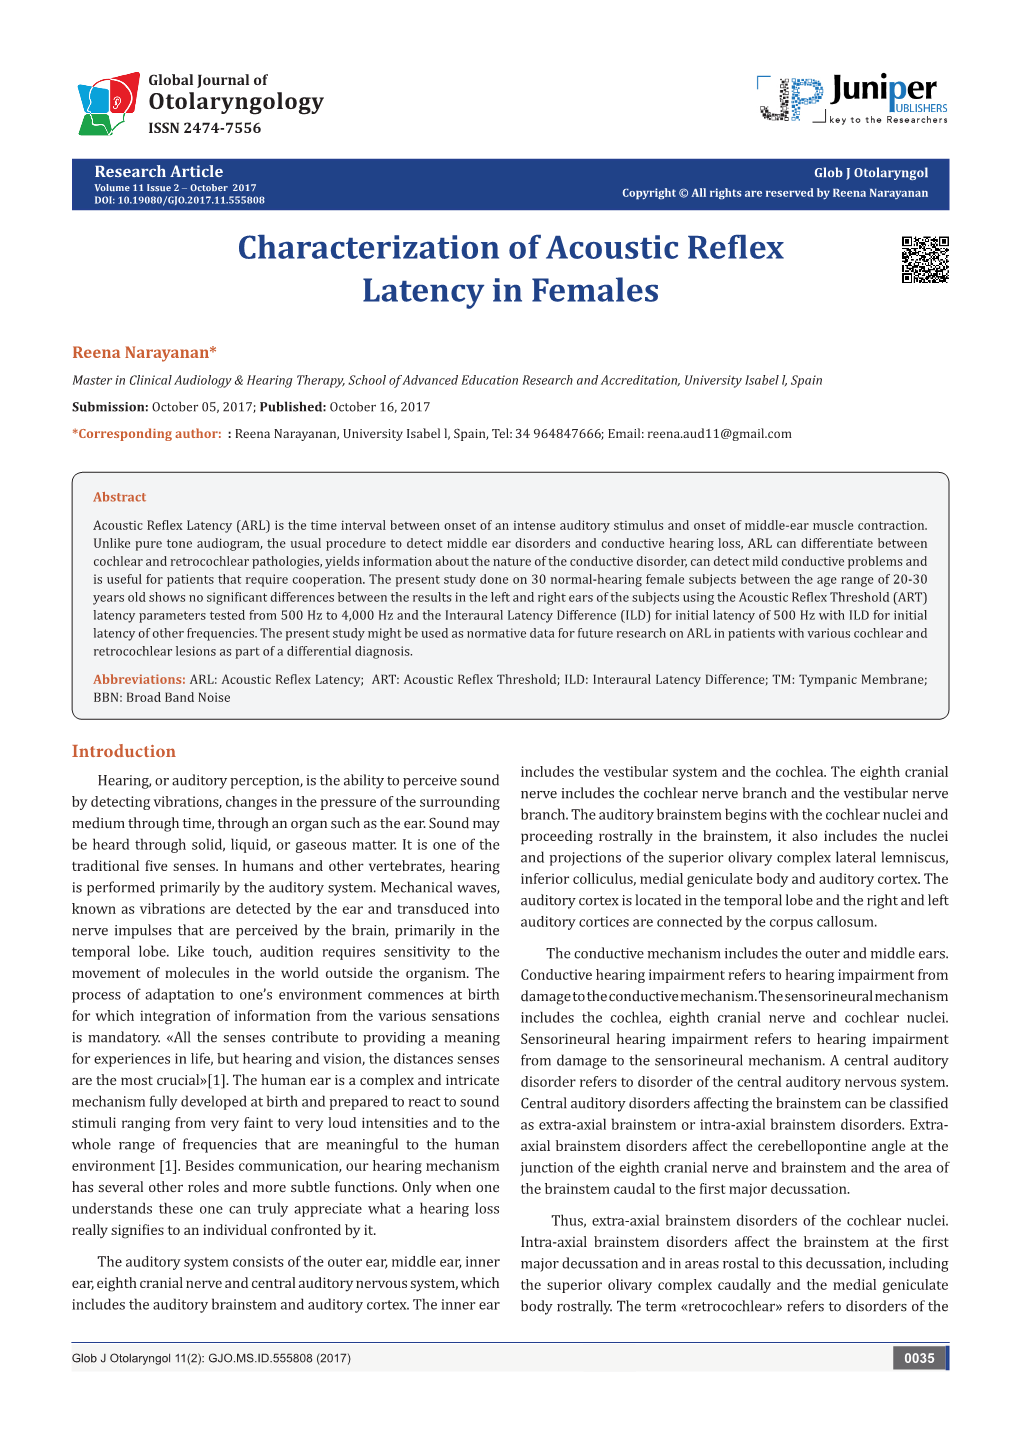 Characterization of Acoustic Reflex Latency in Females